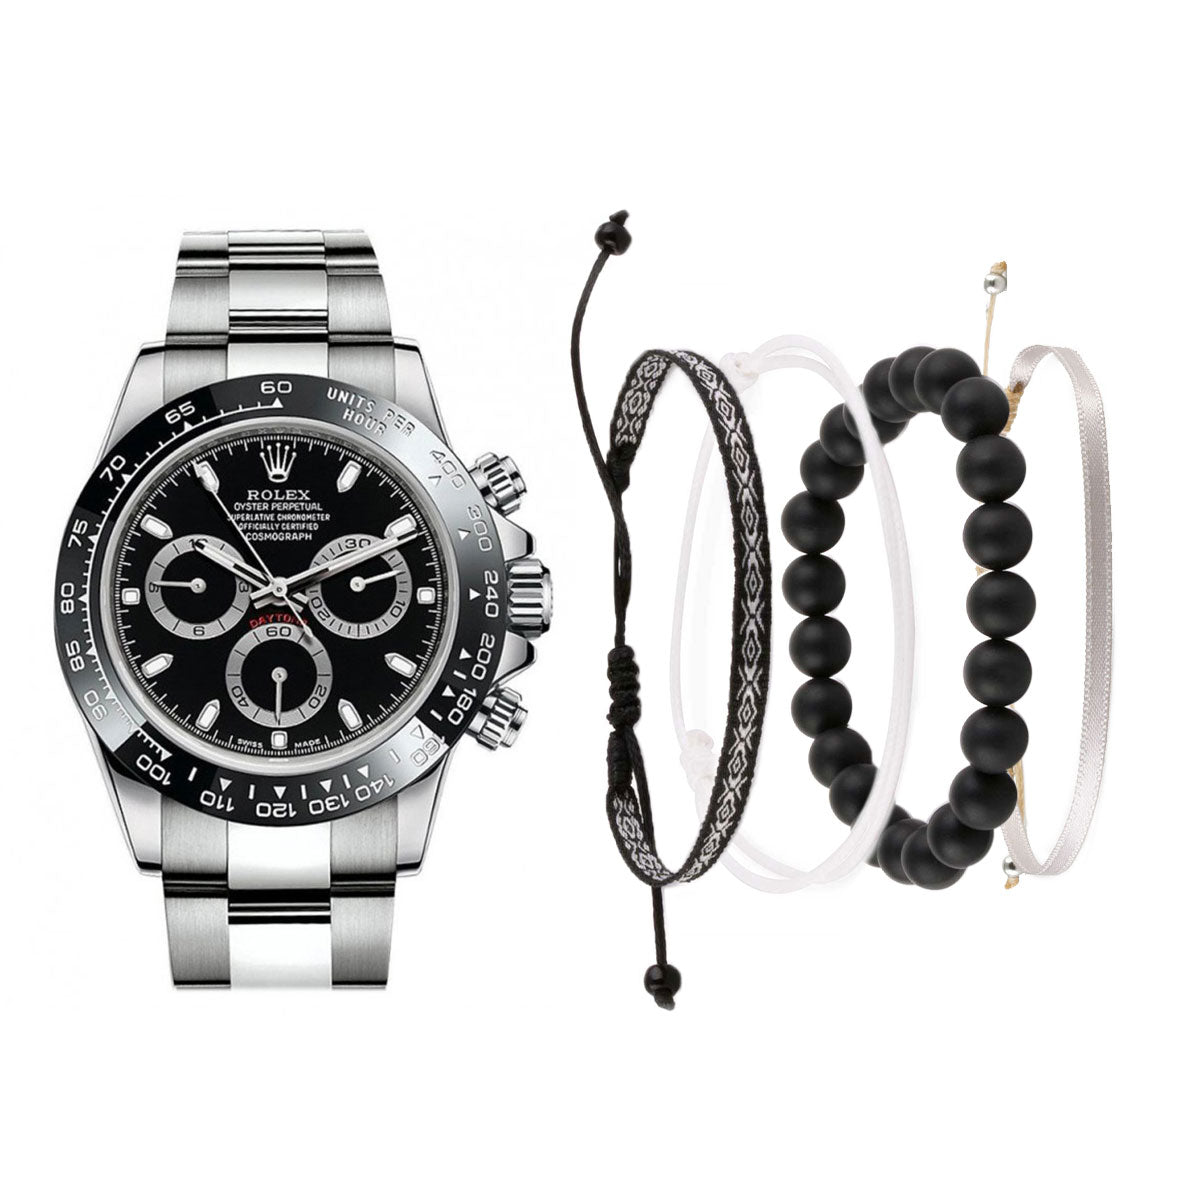 Mixed straps pack - "Rolex Models" special edition